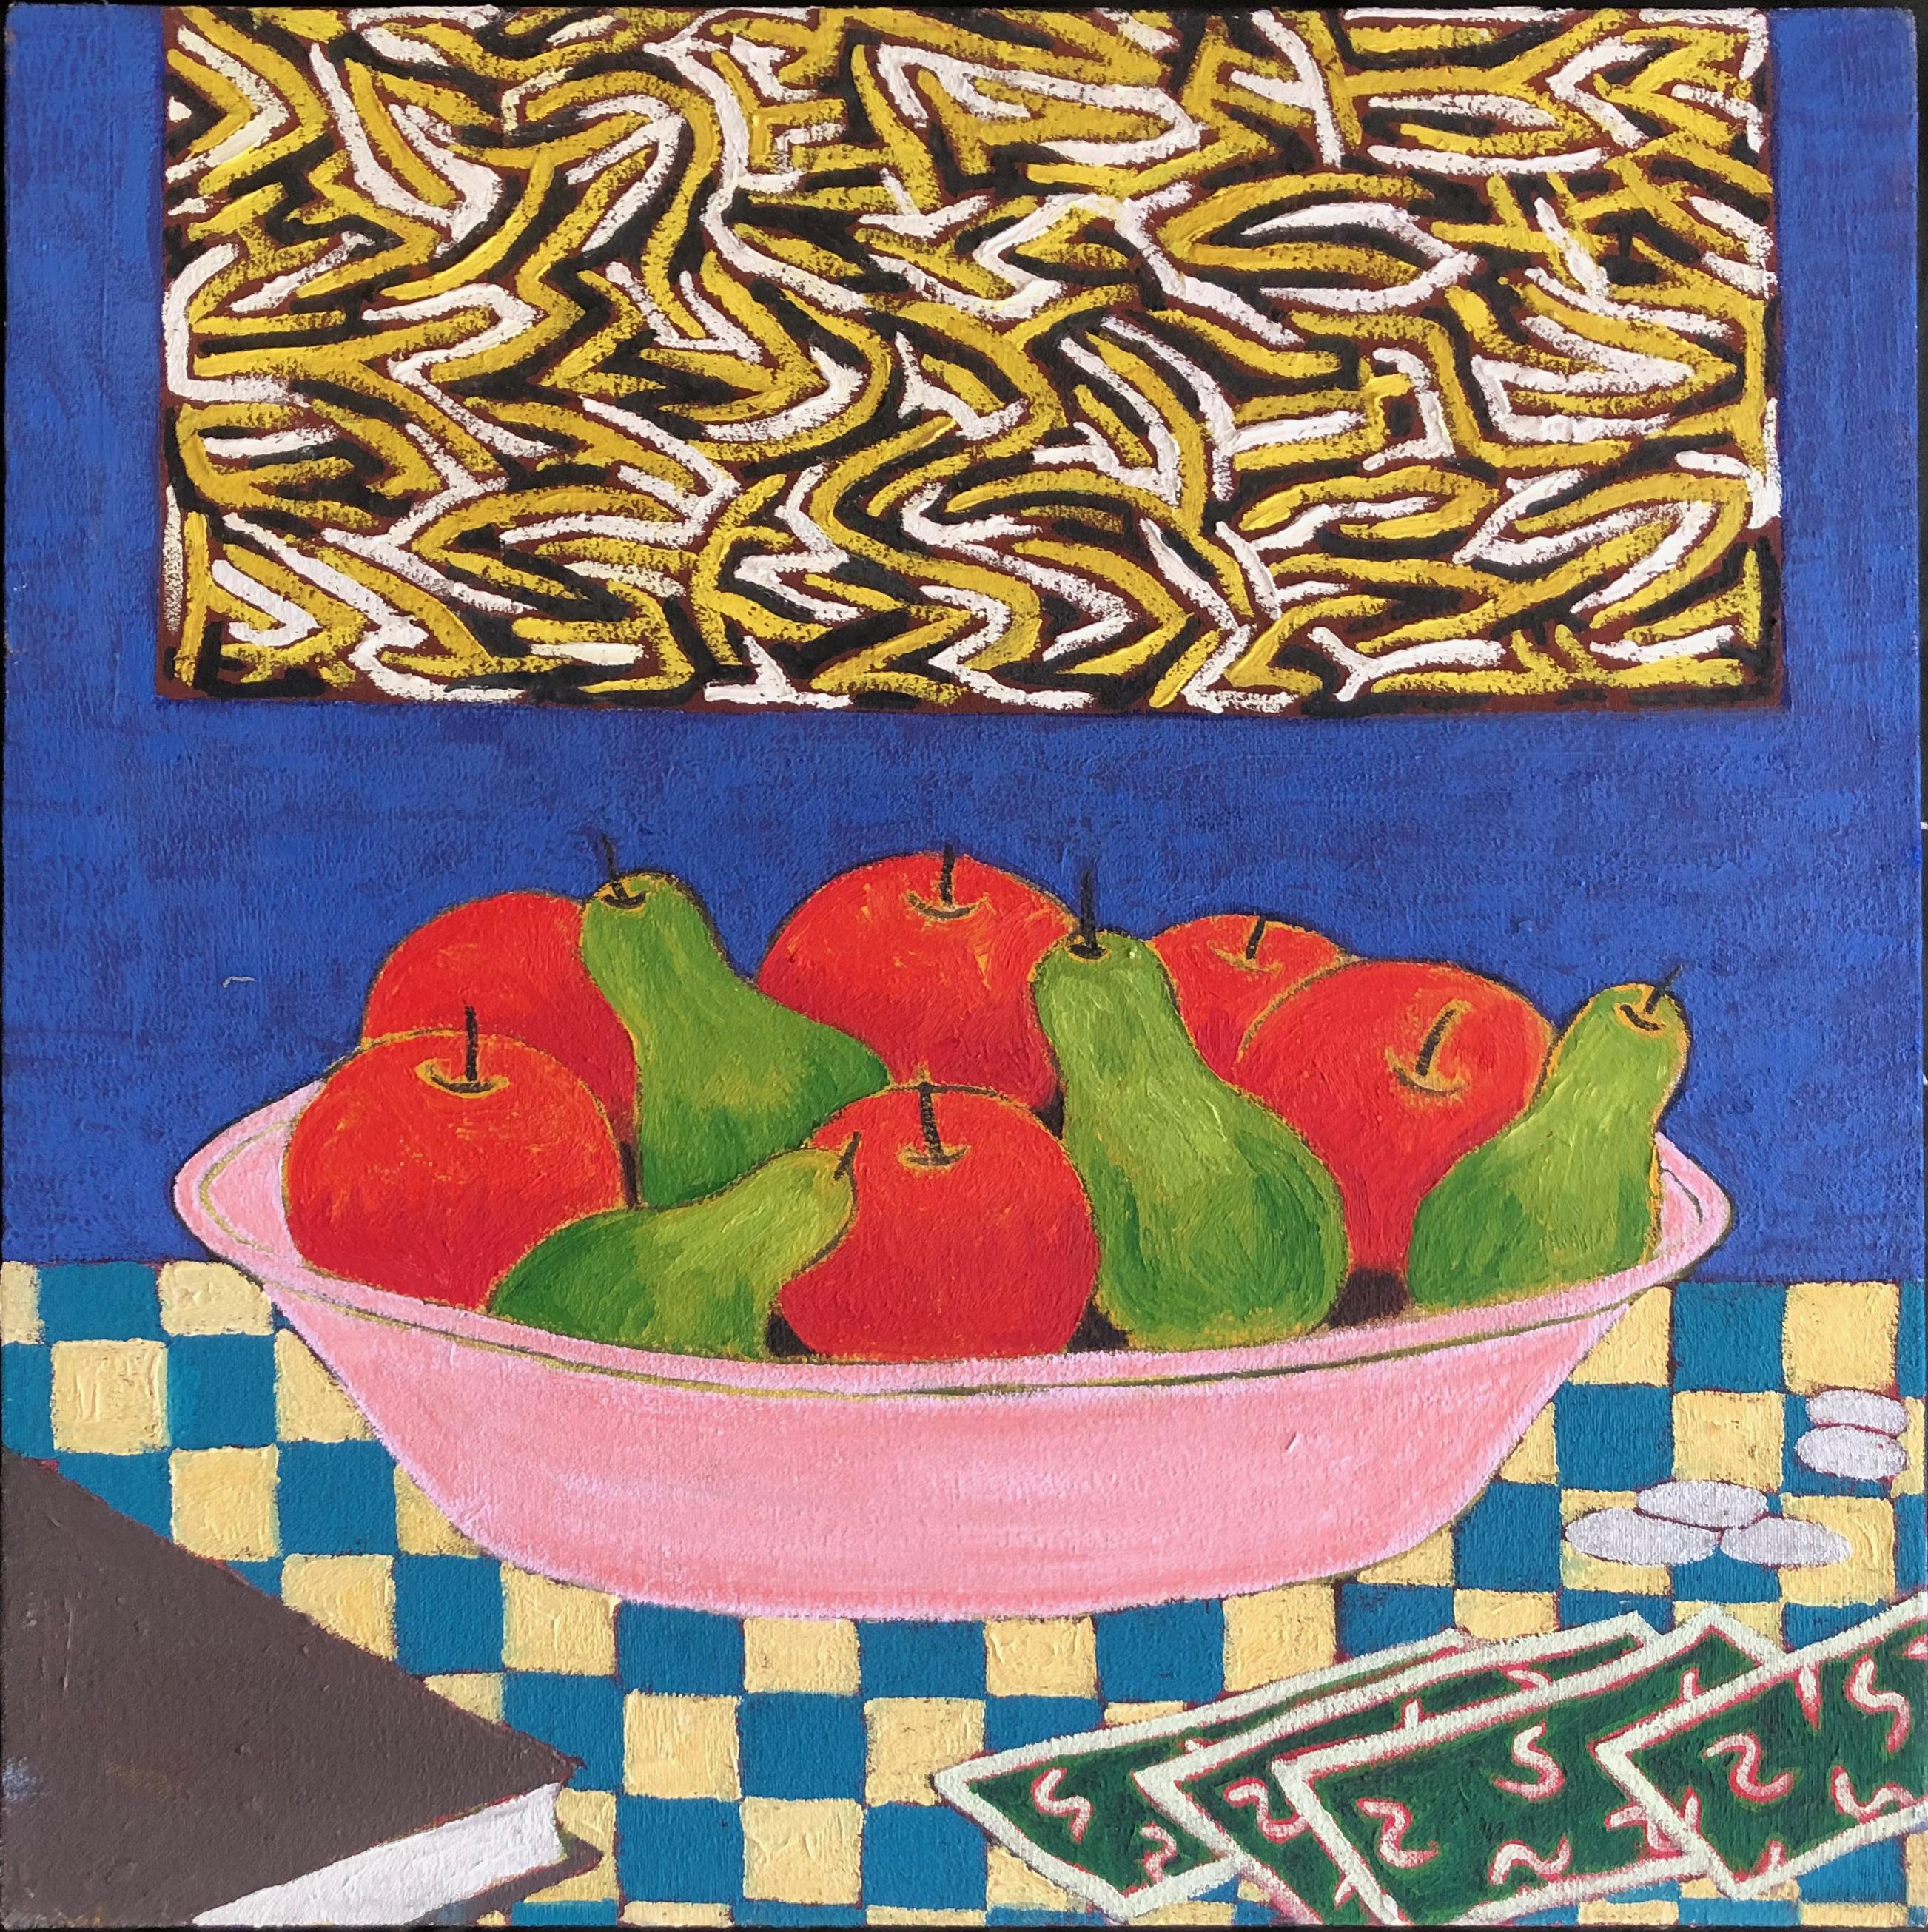 Still life with Apples and Pears with abstract painting